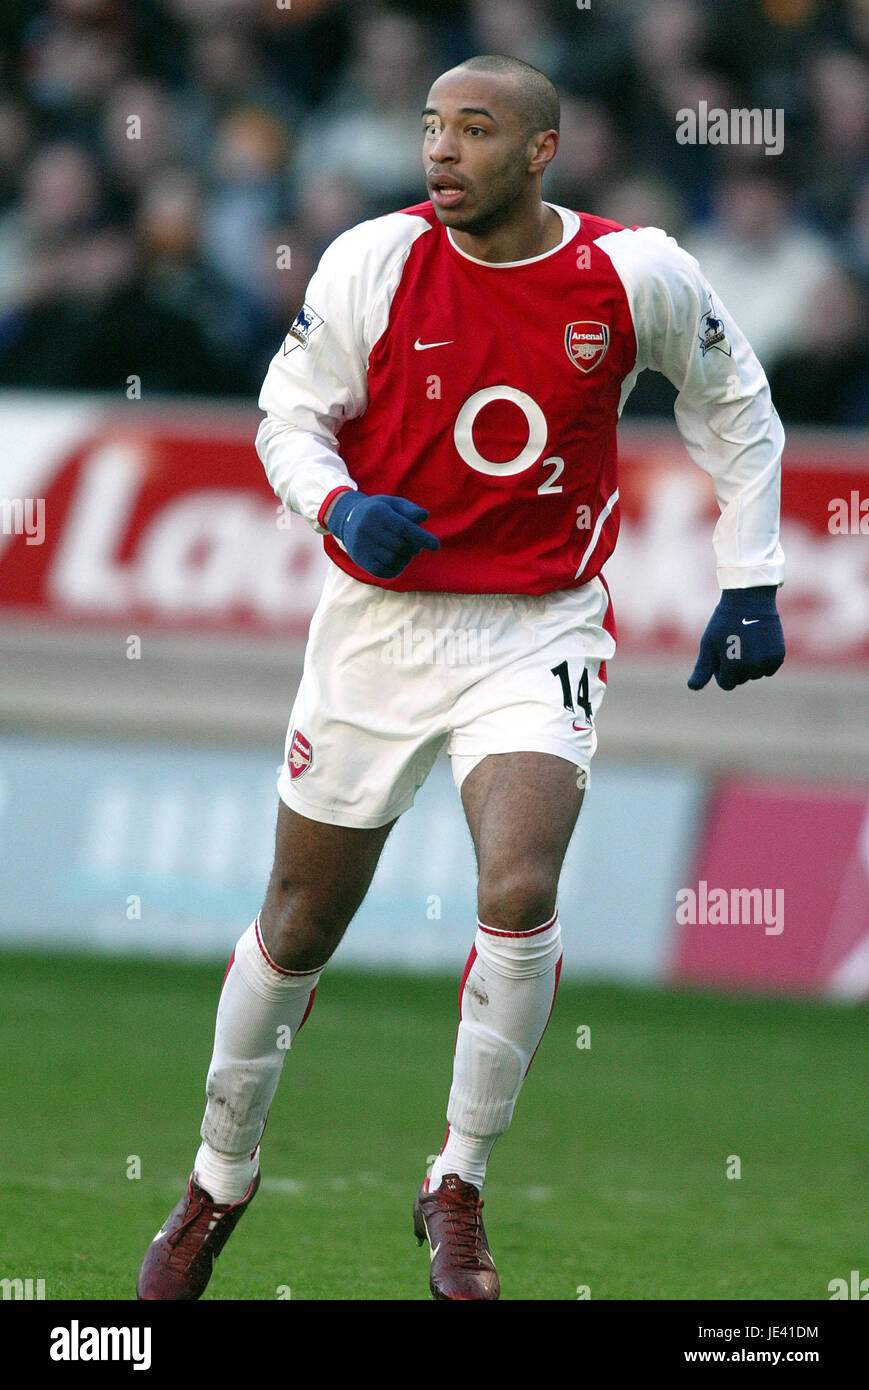 THIERRY HENRY ARSENAL FC MOLINEUX WOLVERHAMPTON ENGLAND 07